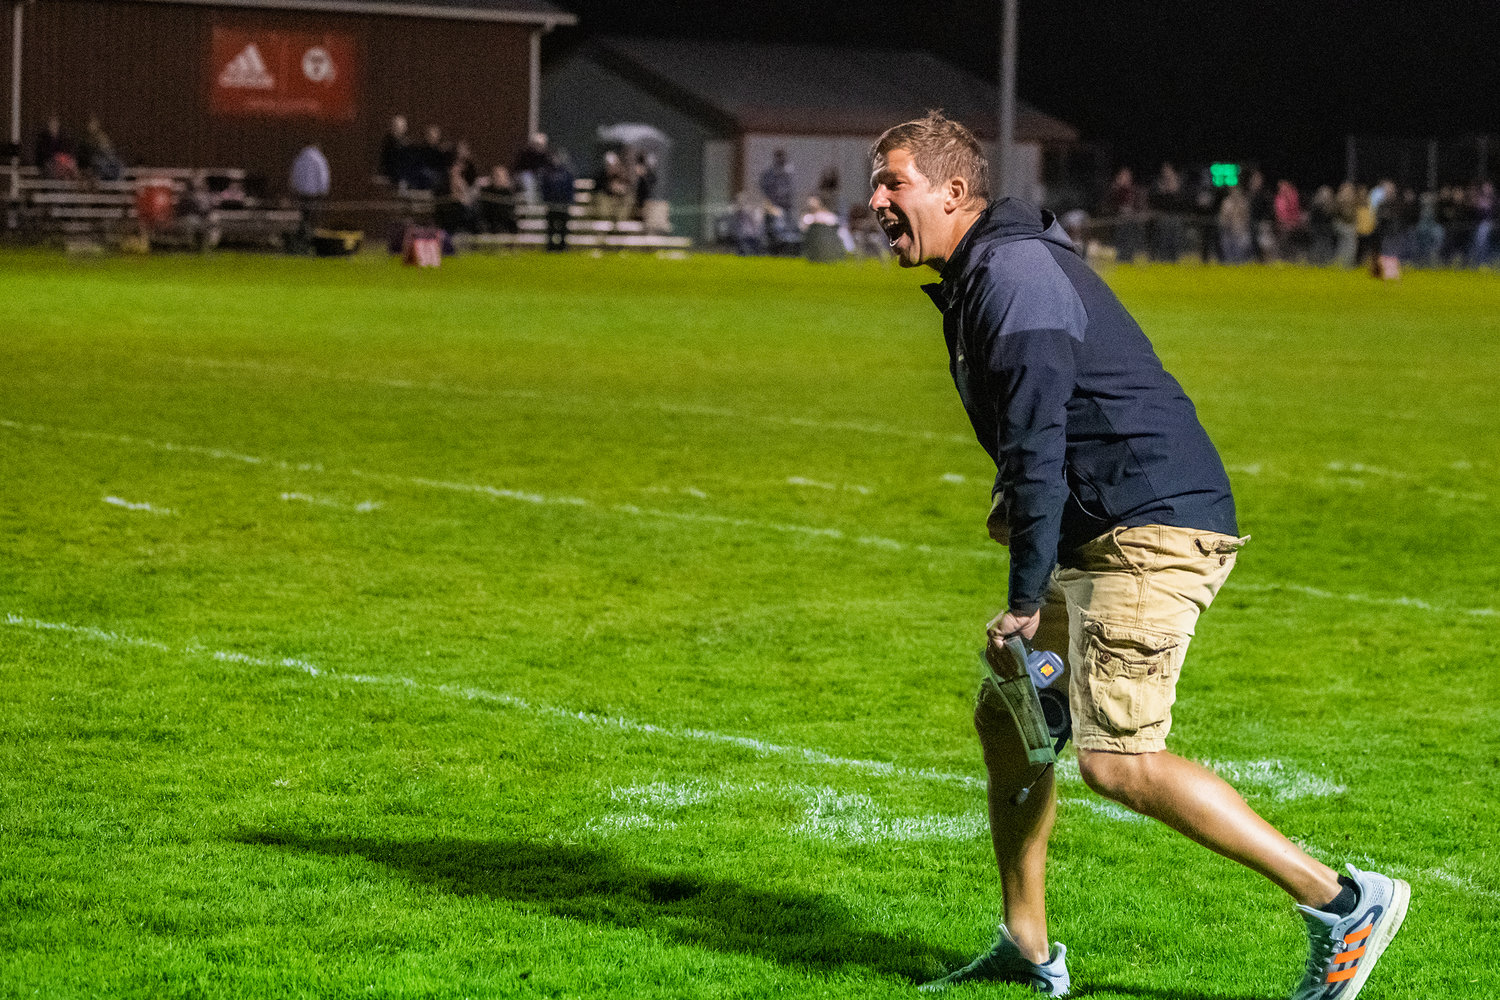 Toledo Head Coach Mike Christensen smiles and runs onto the field as the Riverhawks score Friday night against Onalaska.